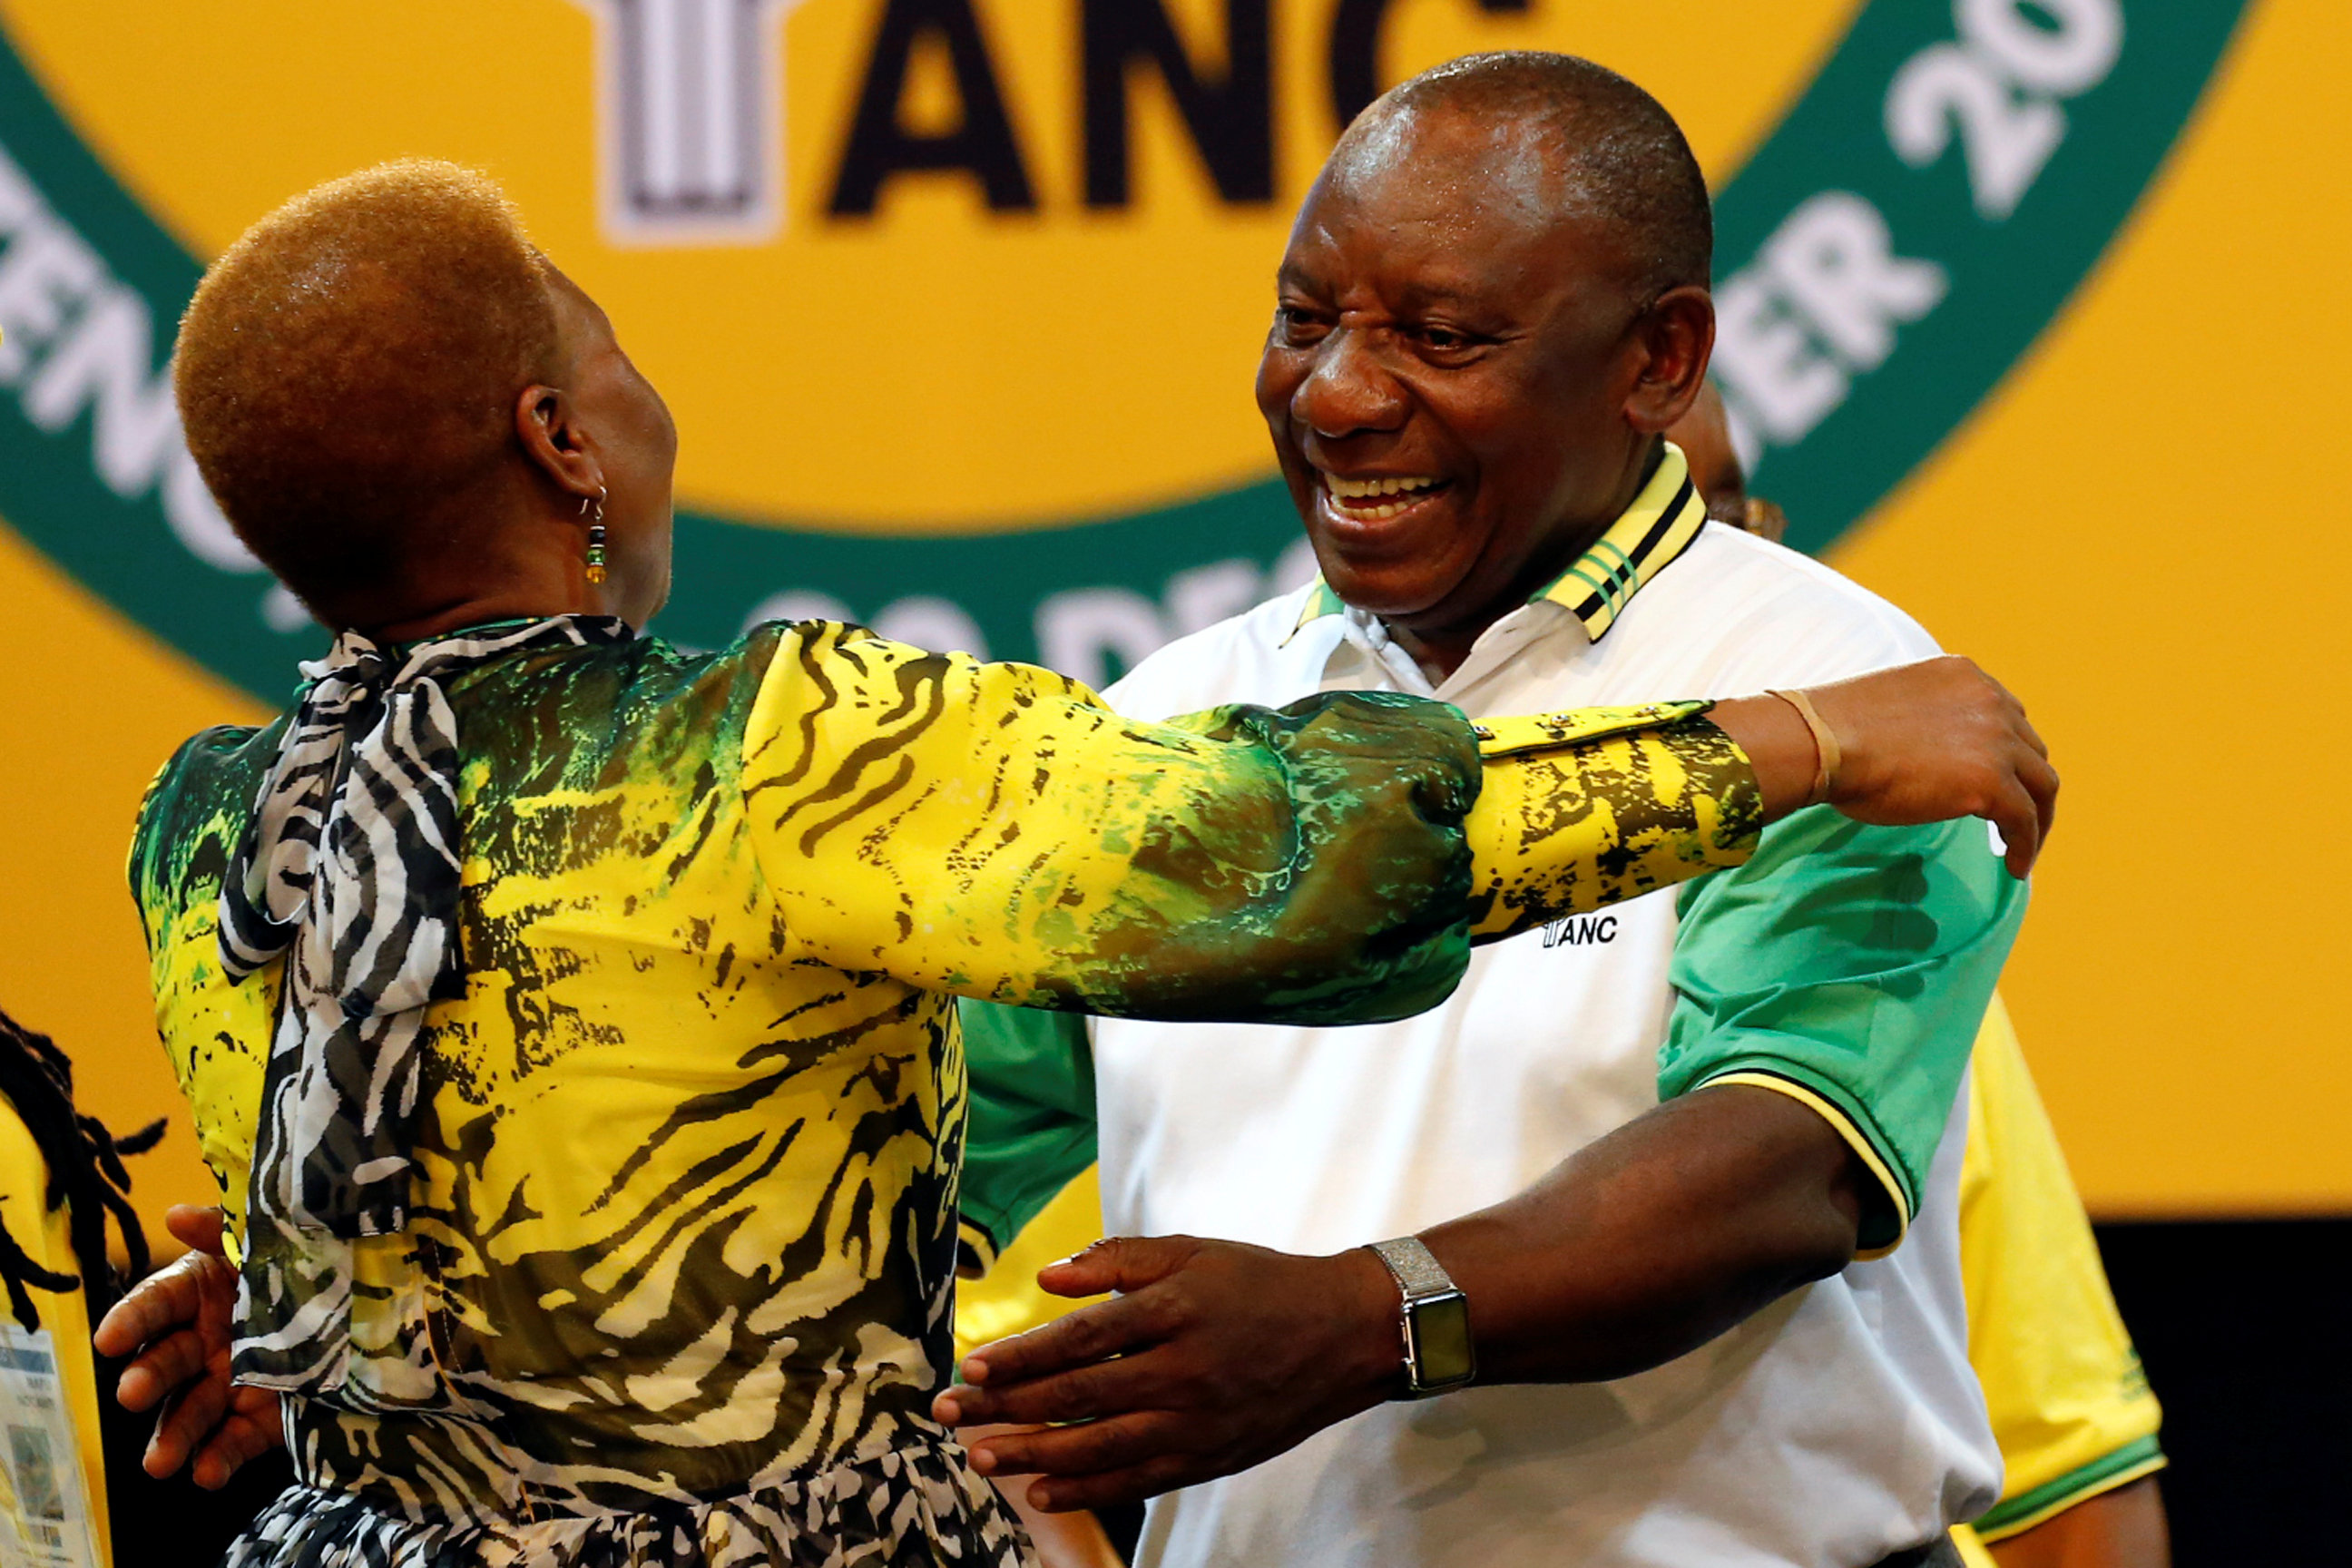 Deputy president of South Africa Cyril Ramaphosa greets an ANC member during the 54th National Conference of the ruling African National Congress, ANC, at the Nasrec Expo Centre in Johannesburg, South Africa December 18, 2017. REUTERS/Siphiwe Sibeko